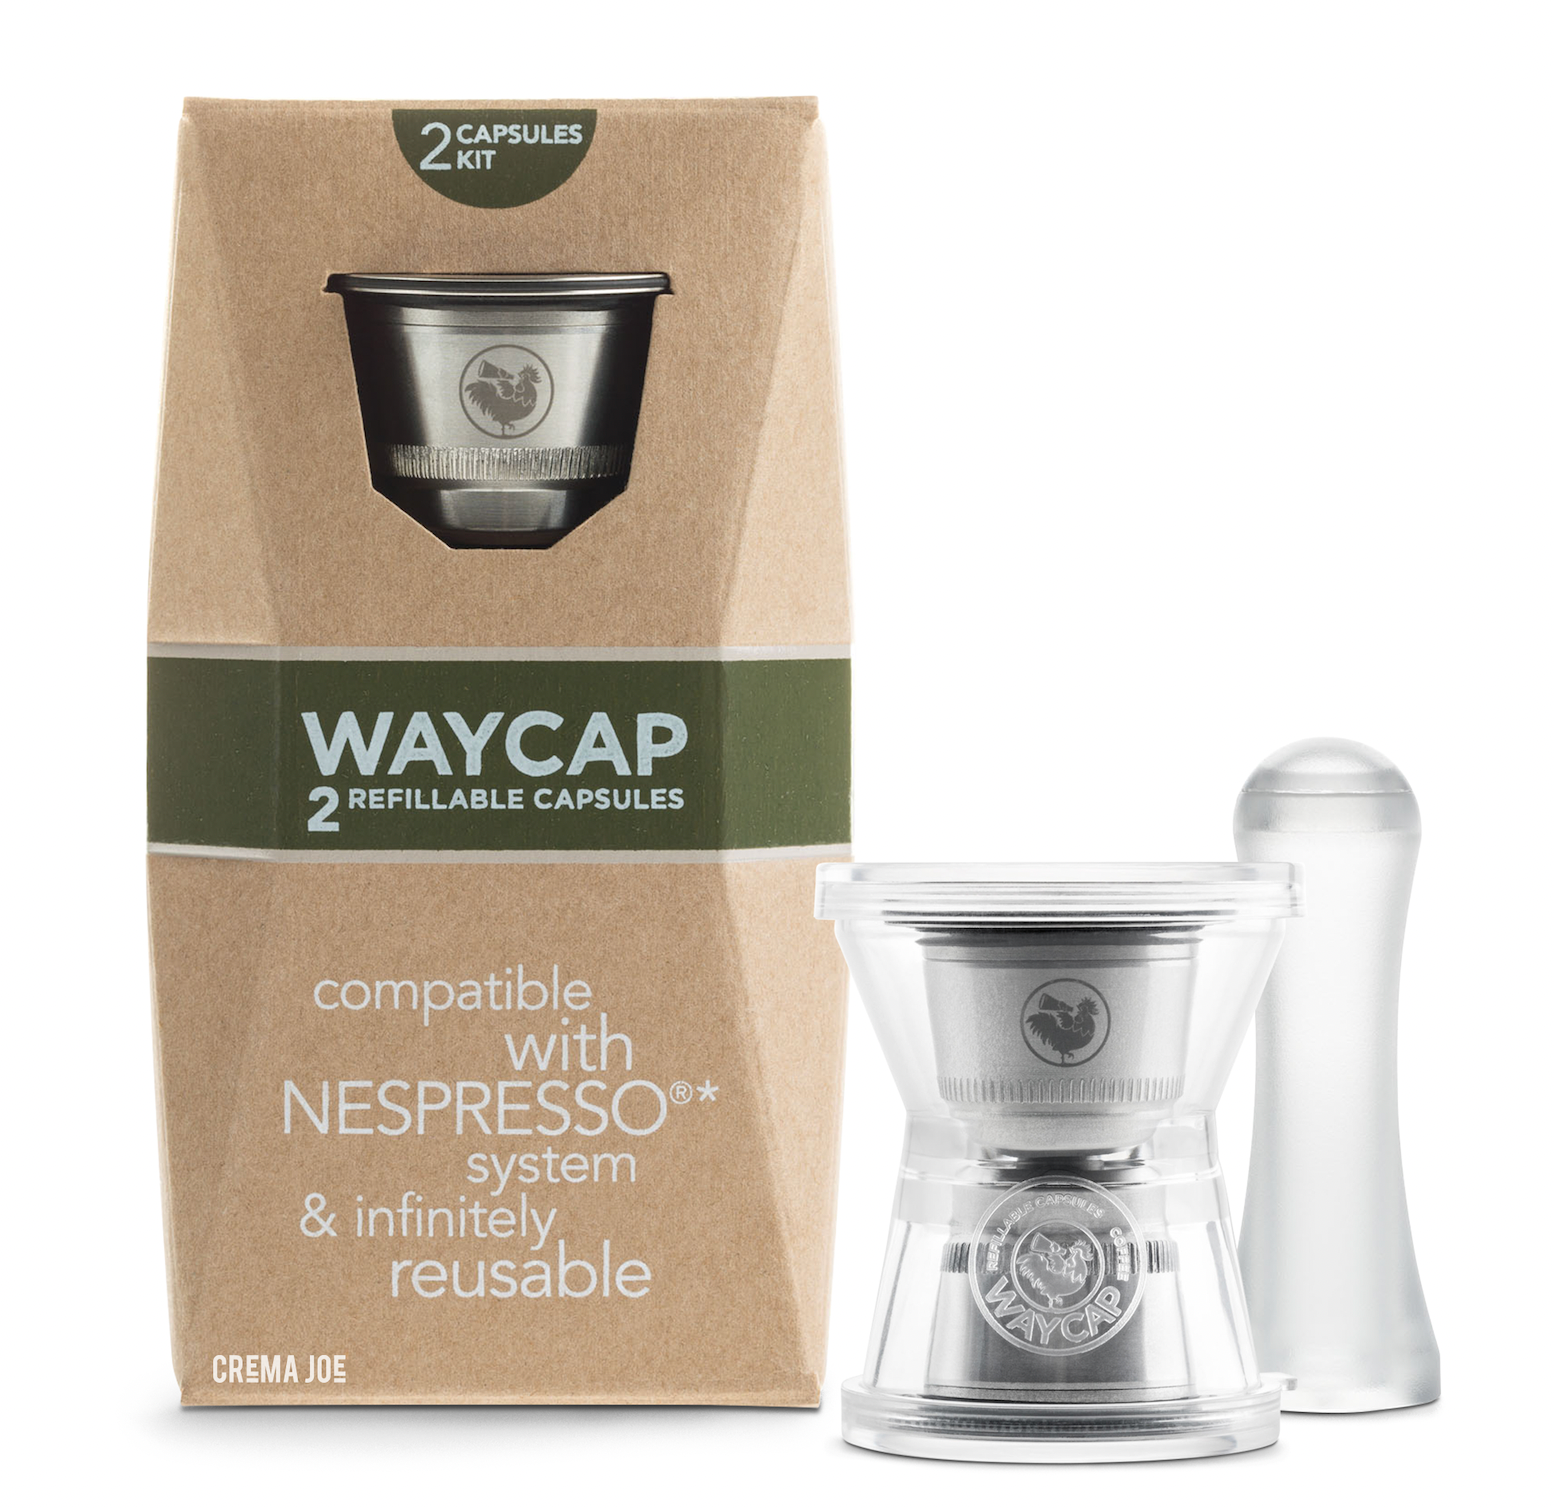 Reusable / refillable WayCap coffee capsules compatible with Nespresso machine